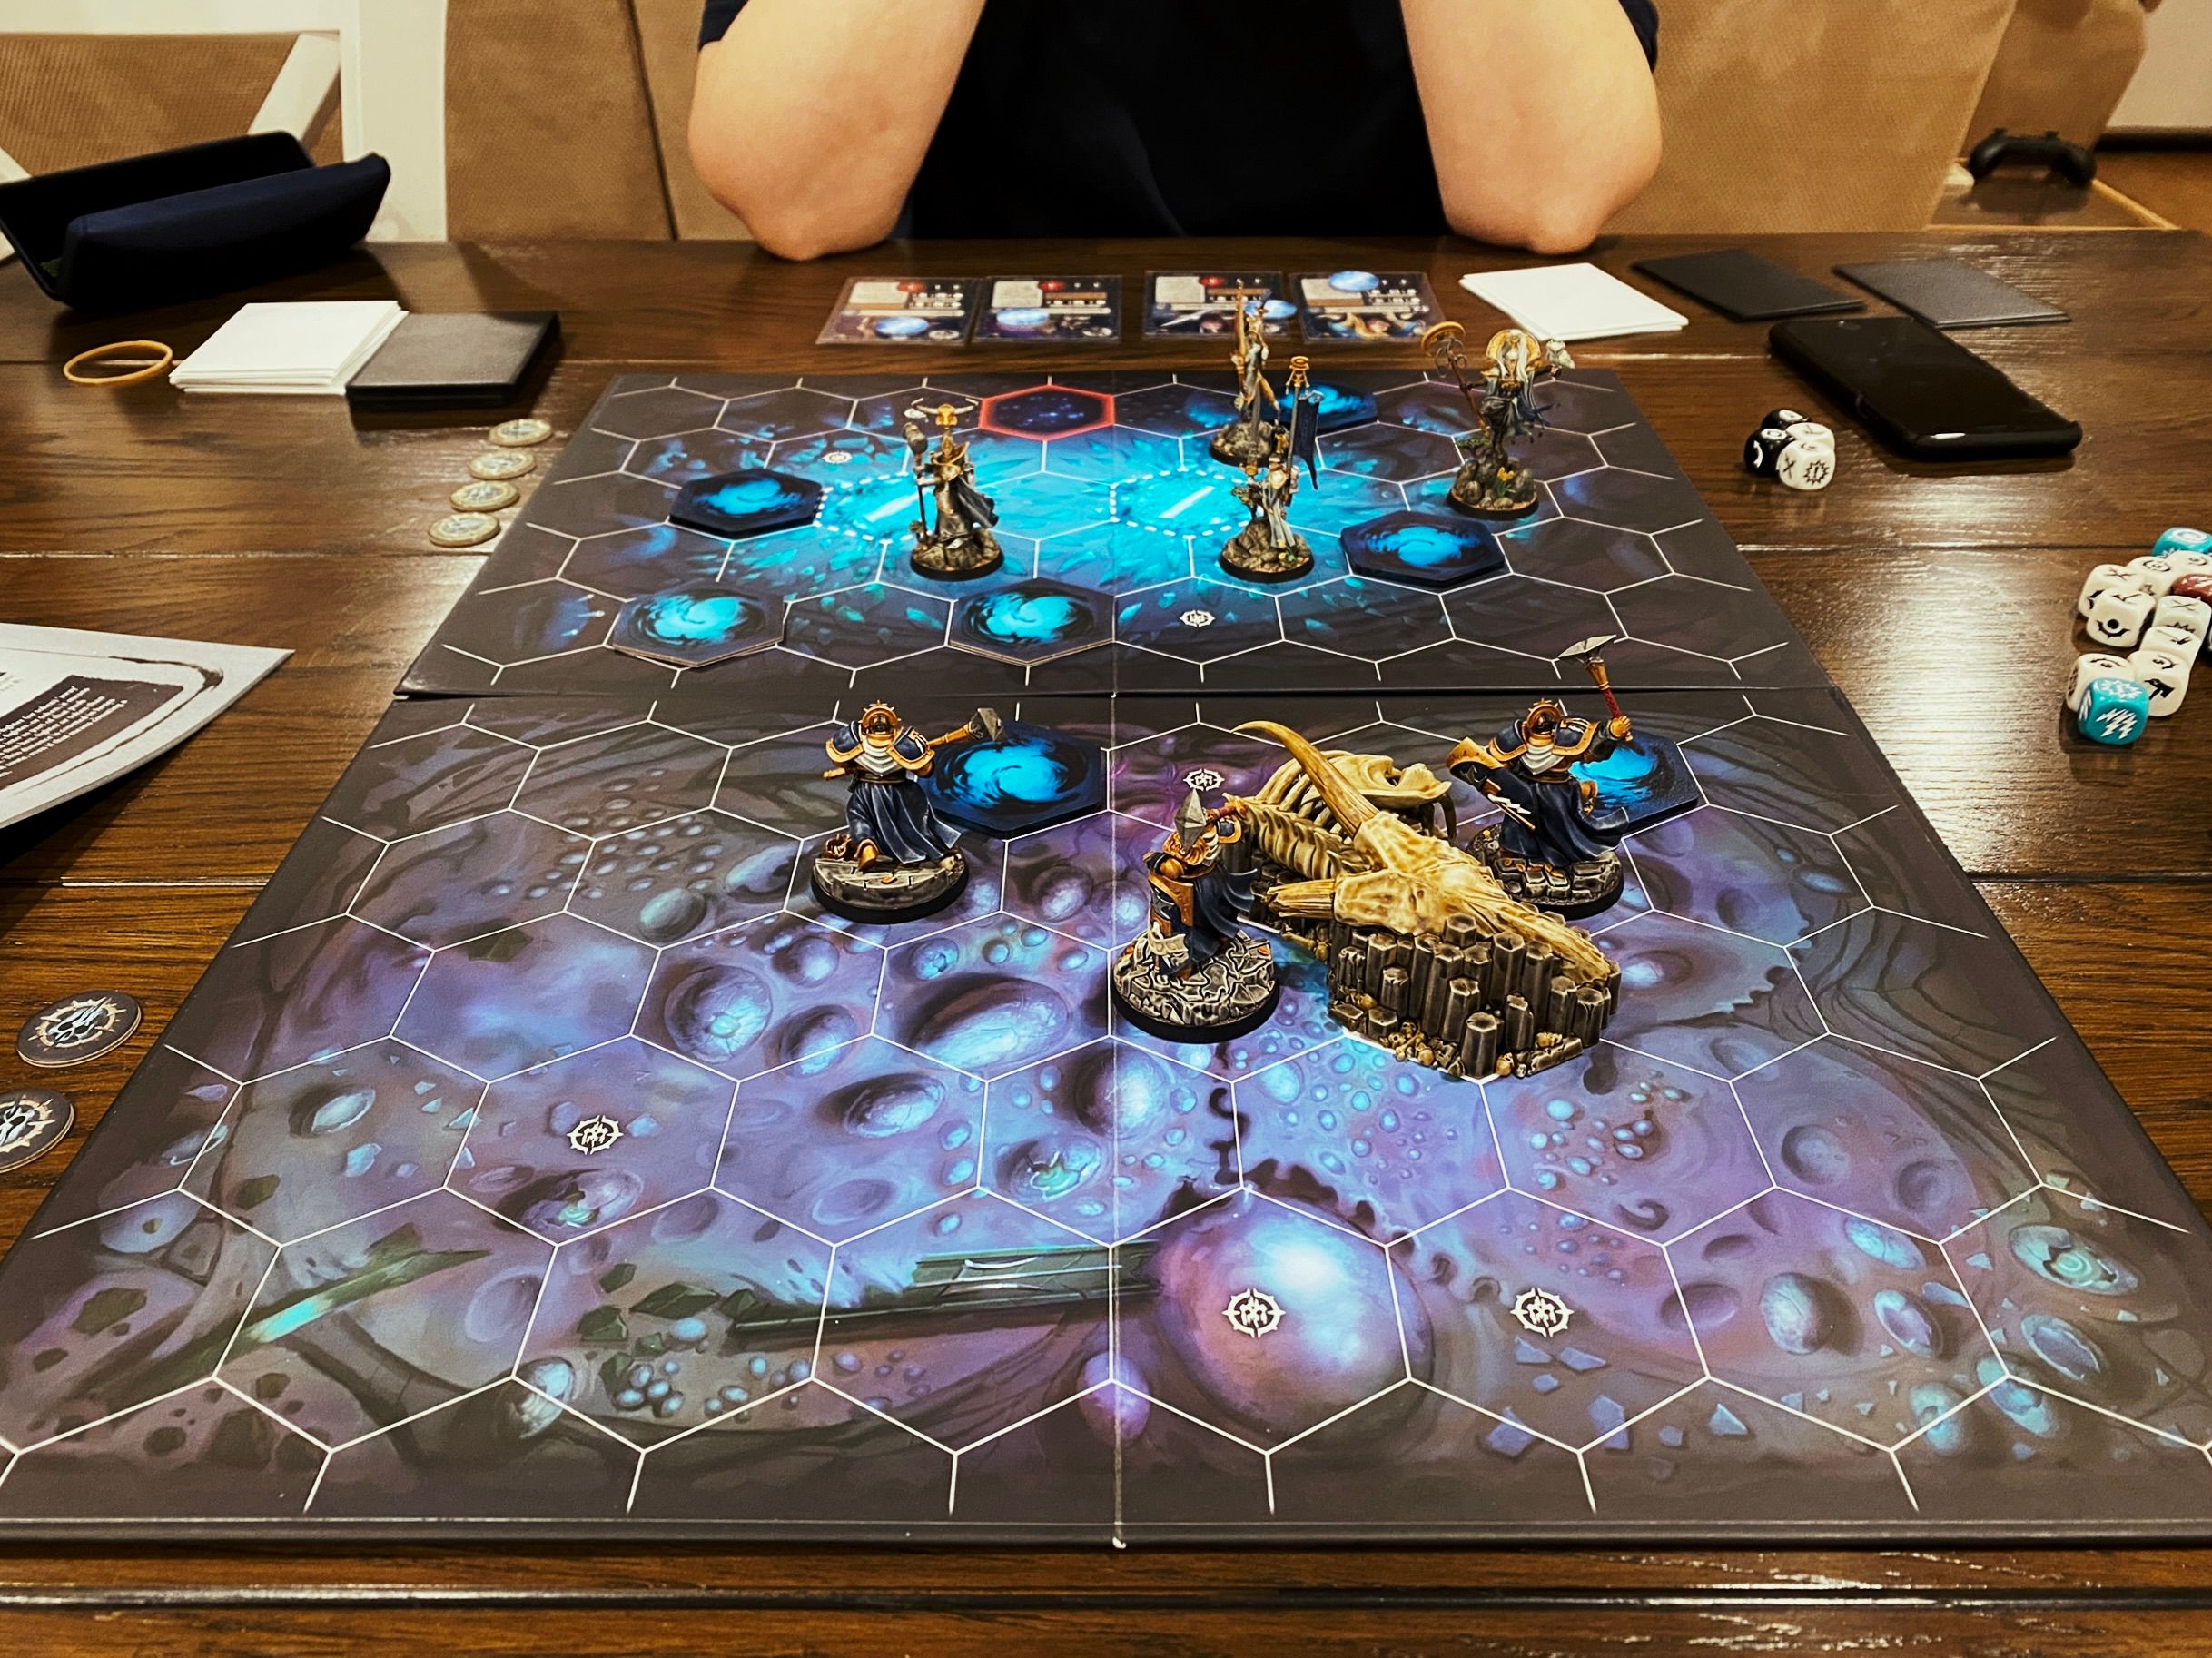 A photo of the board of a Warhammer Underworlds game. The board has hexagonal tiles printed on it with a blue murky-depths kind of feel of artwork, at the front are three heavily-armoured warriors in gold and dark blue armour (Ironsoul's Condemnors), and at the back are four lithe and elegant aelves (Myari's Purifiers).